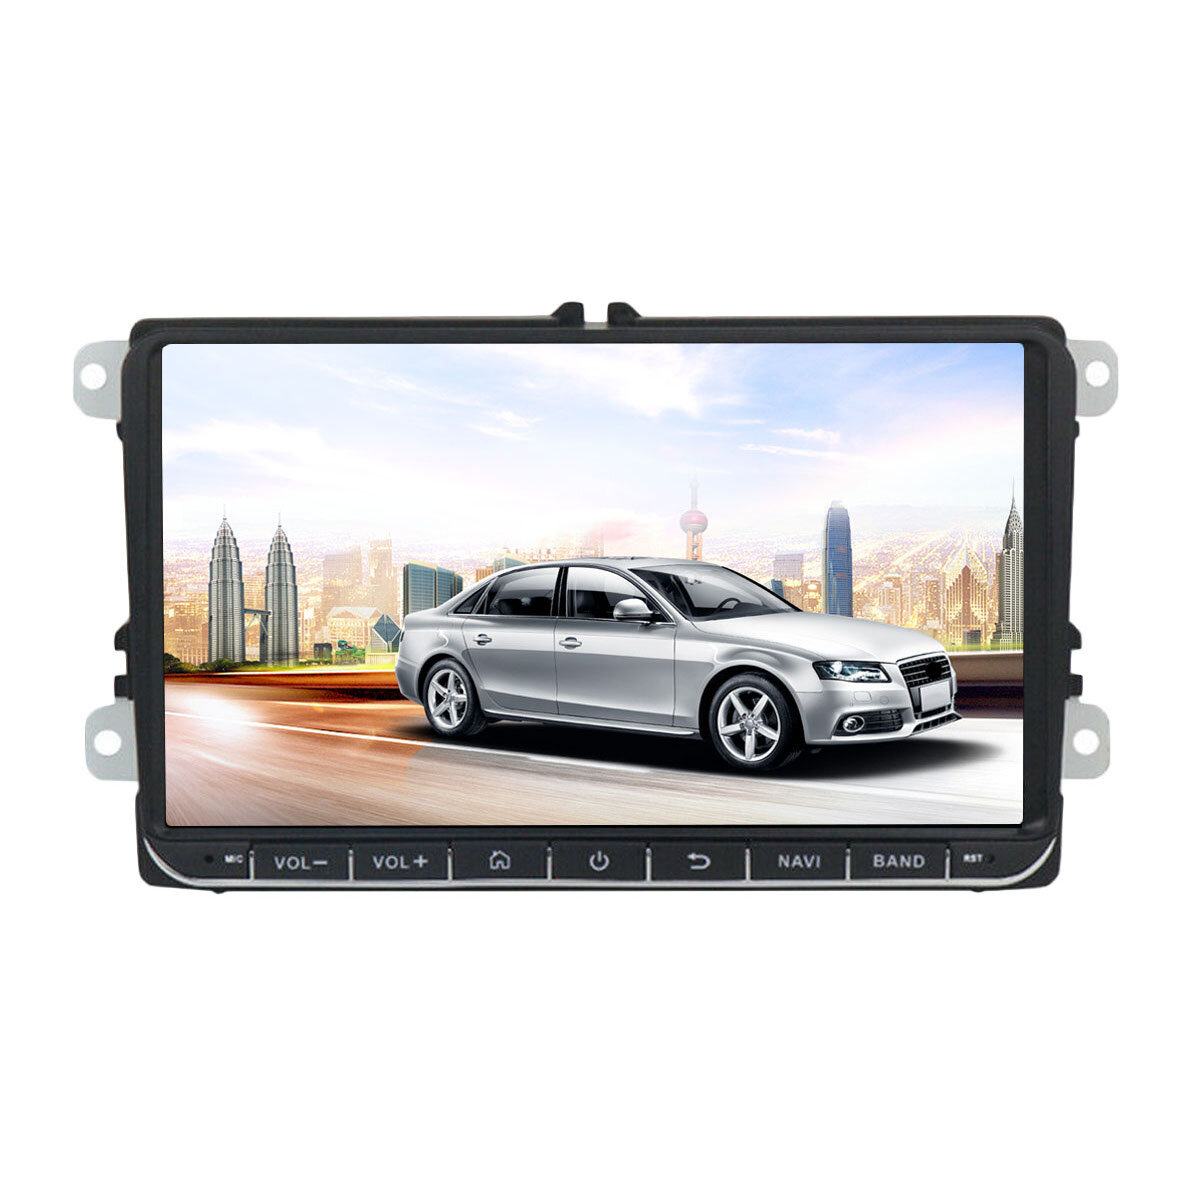 9 Inch 2 DIN for Android 8.1 Car Stereo Quad Core 1+16G Radio Touch Screen GPS bluetooth WIFI for VW Skoda Seat